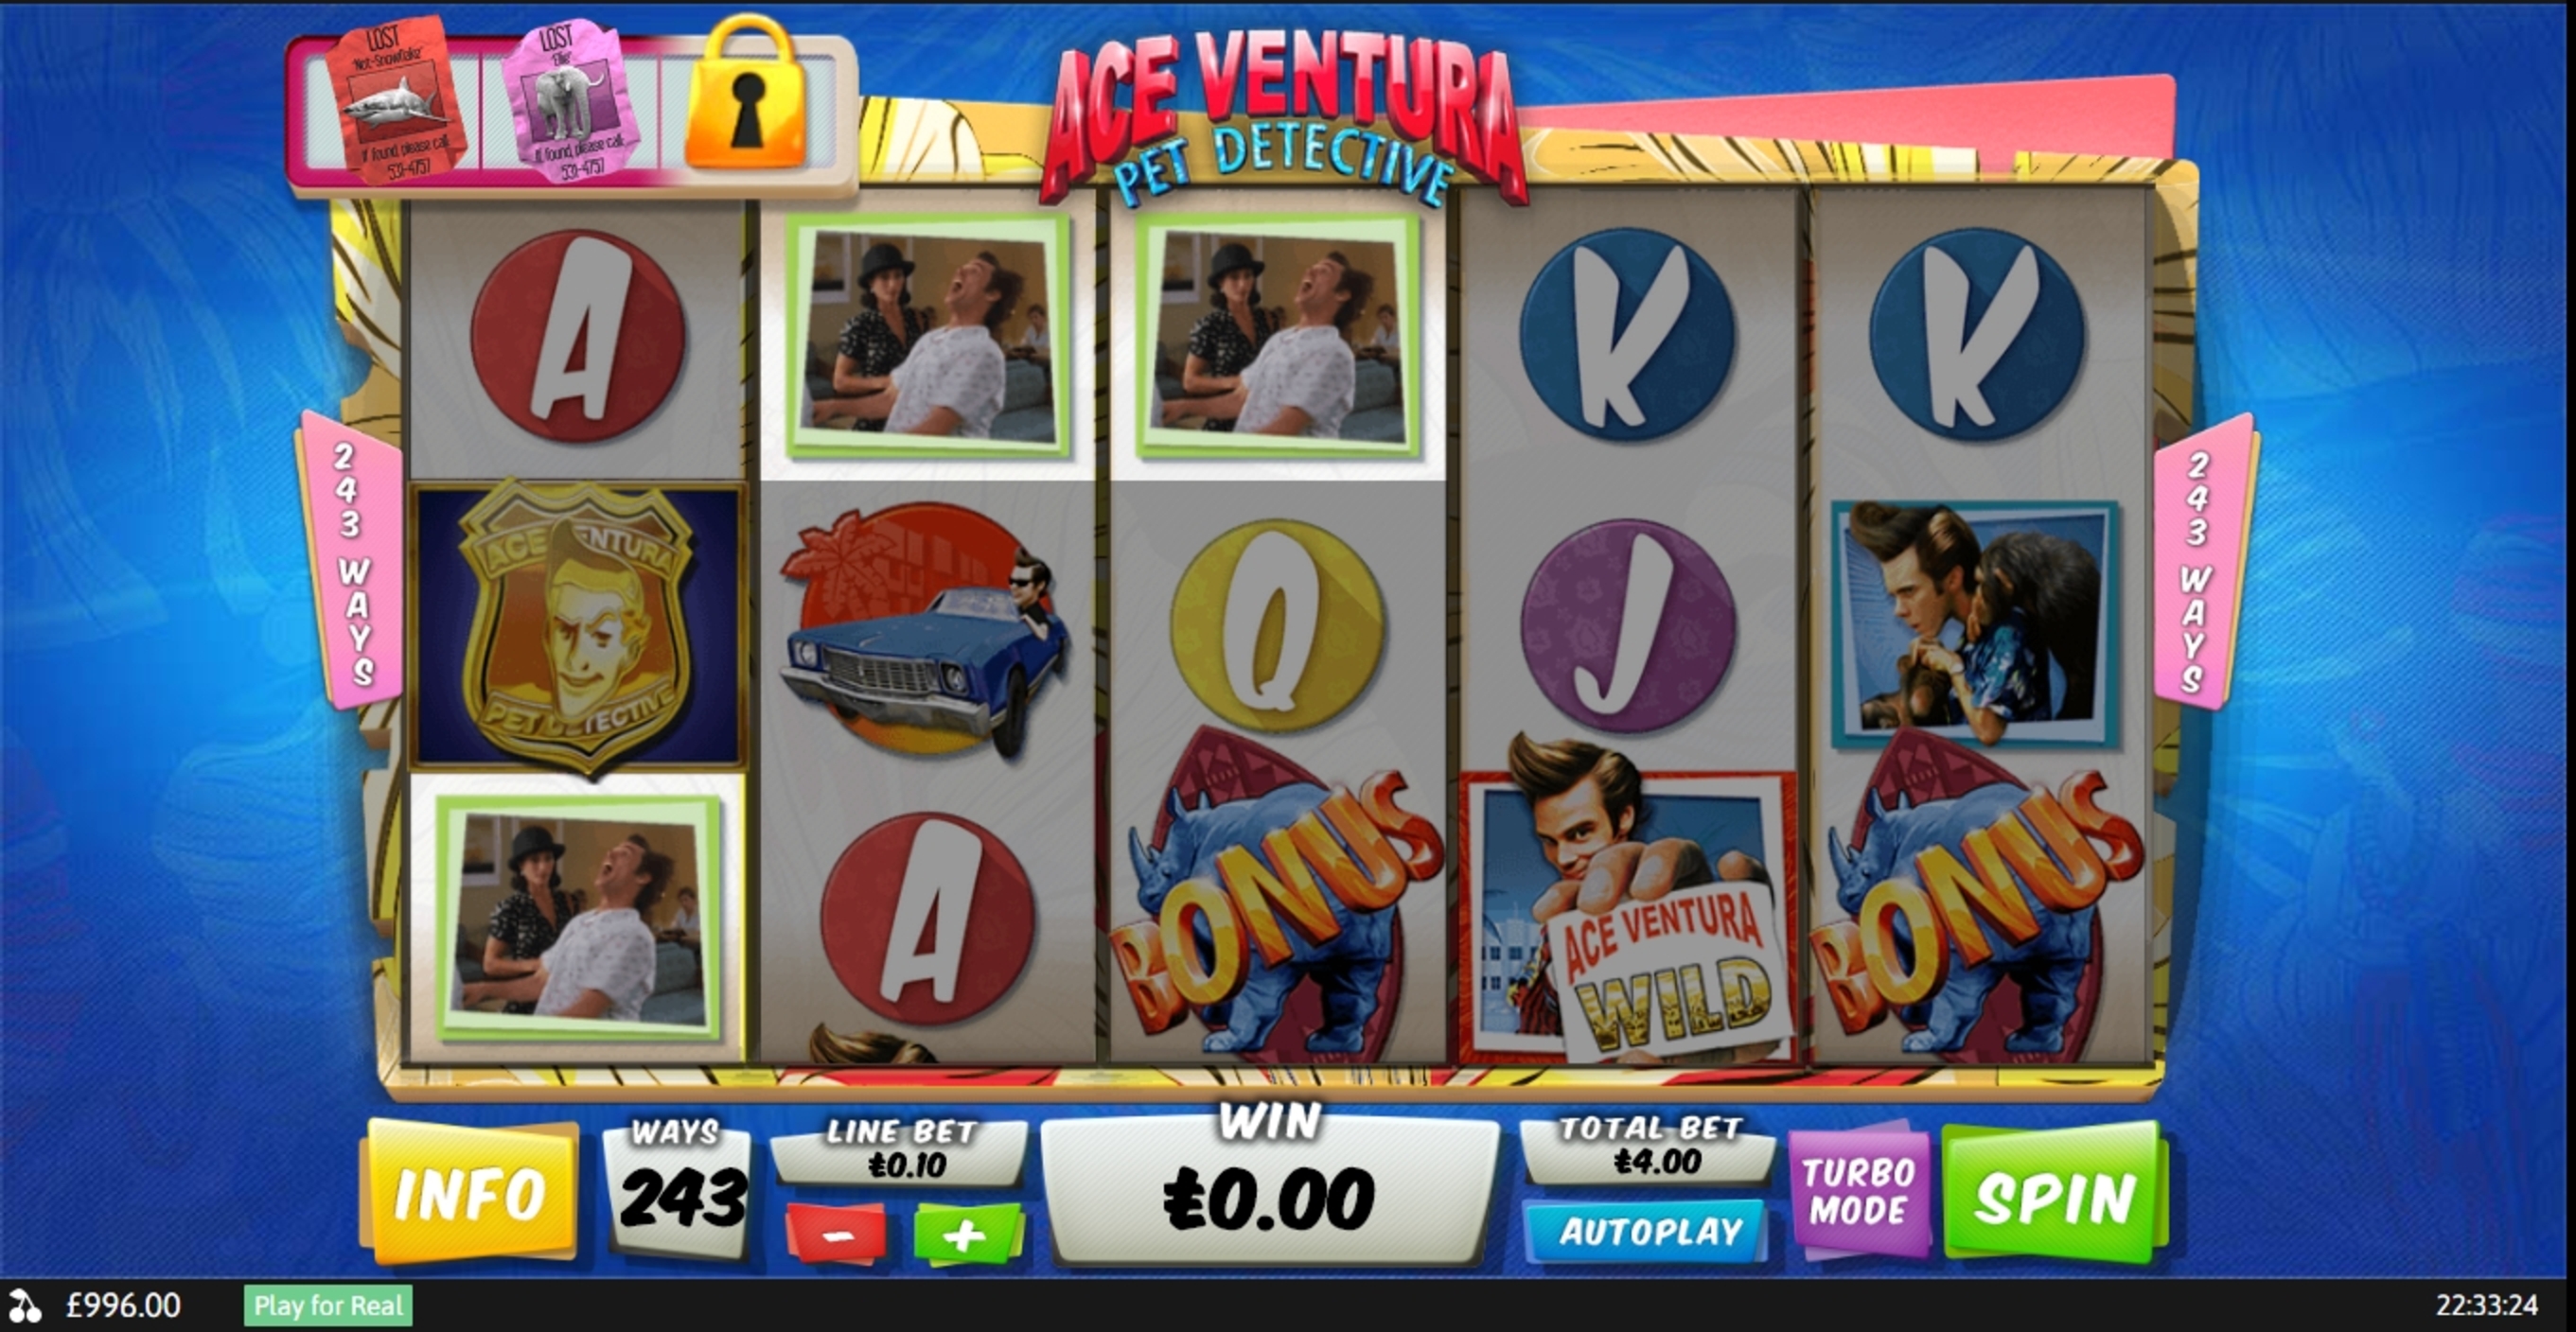 Win Money in Ace Ventura Free Slot Game by Playtech